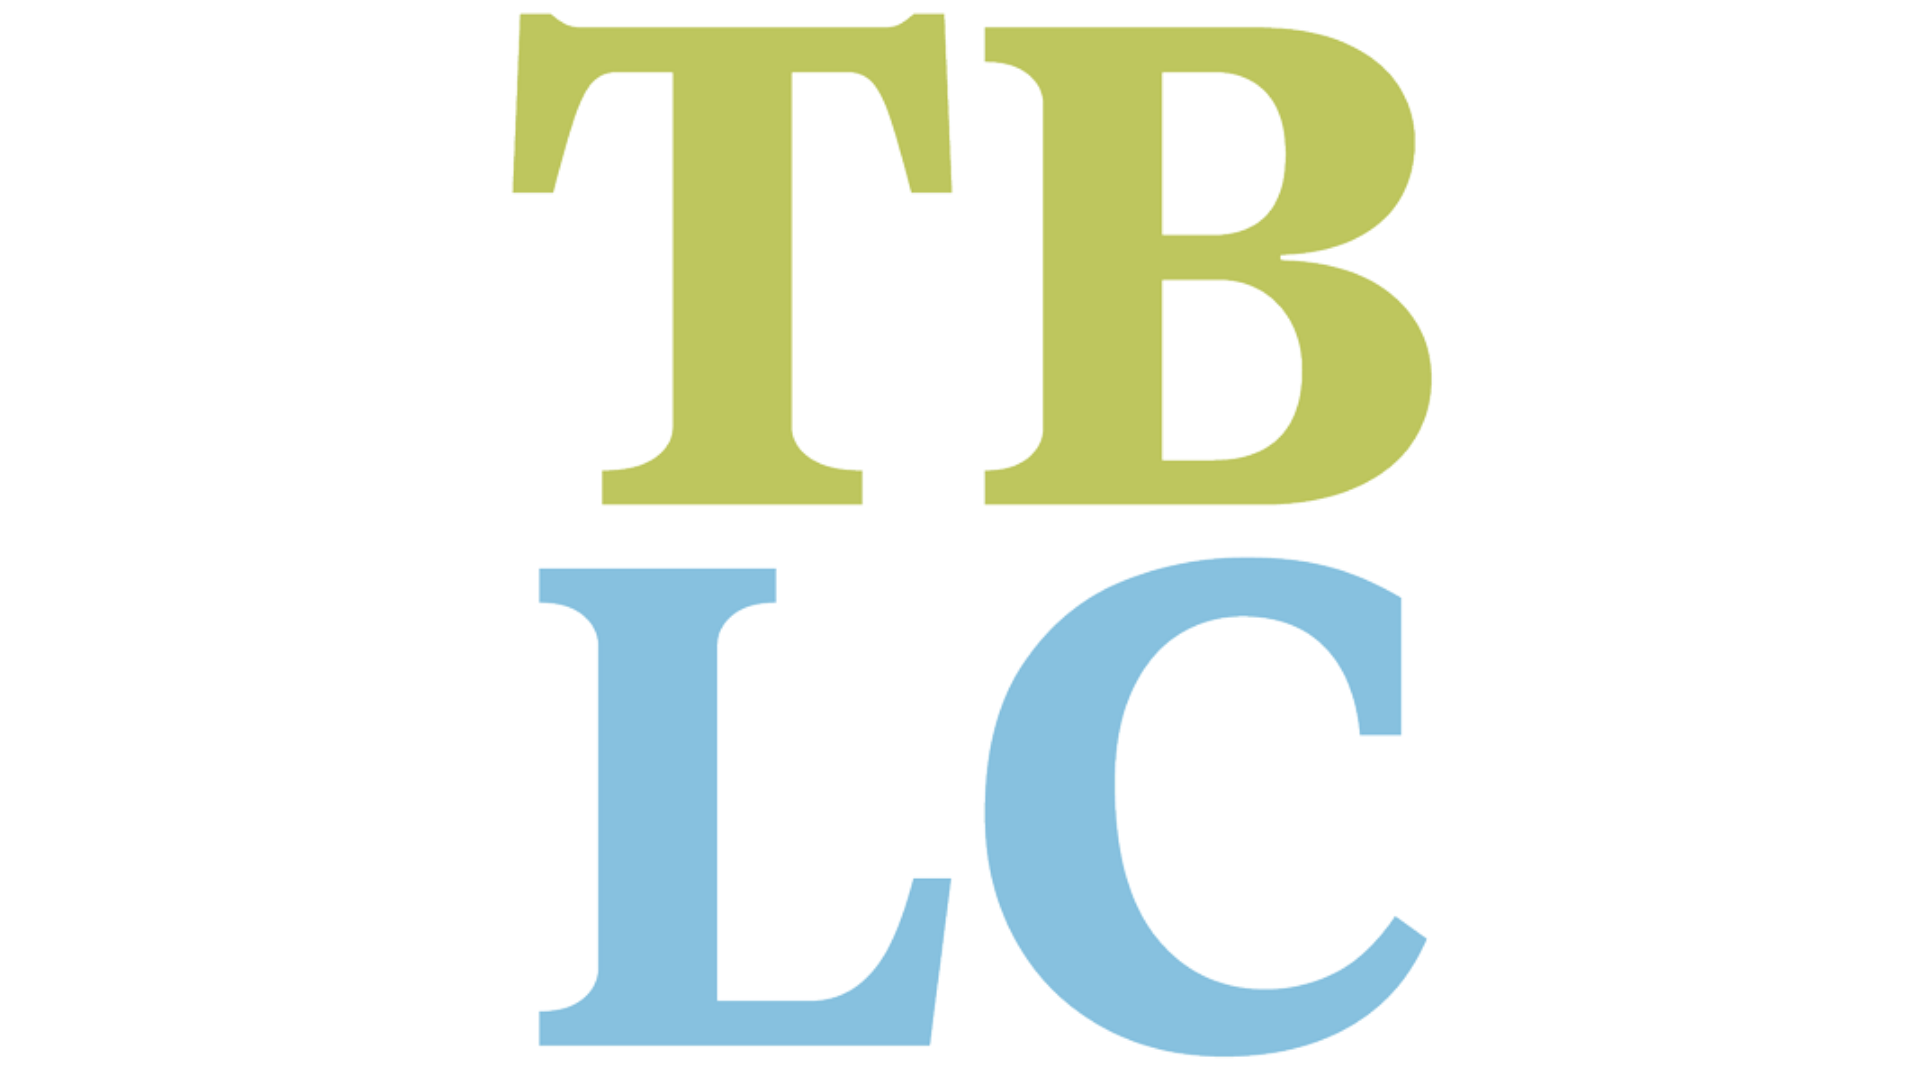 TBLC Stacked Logo